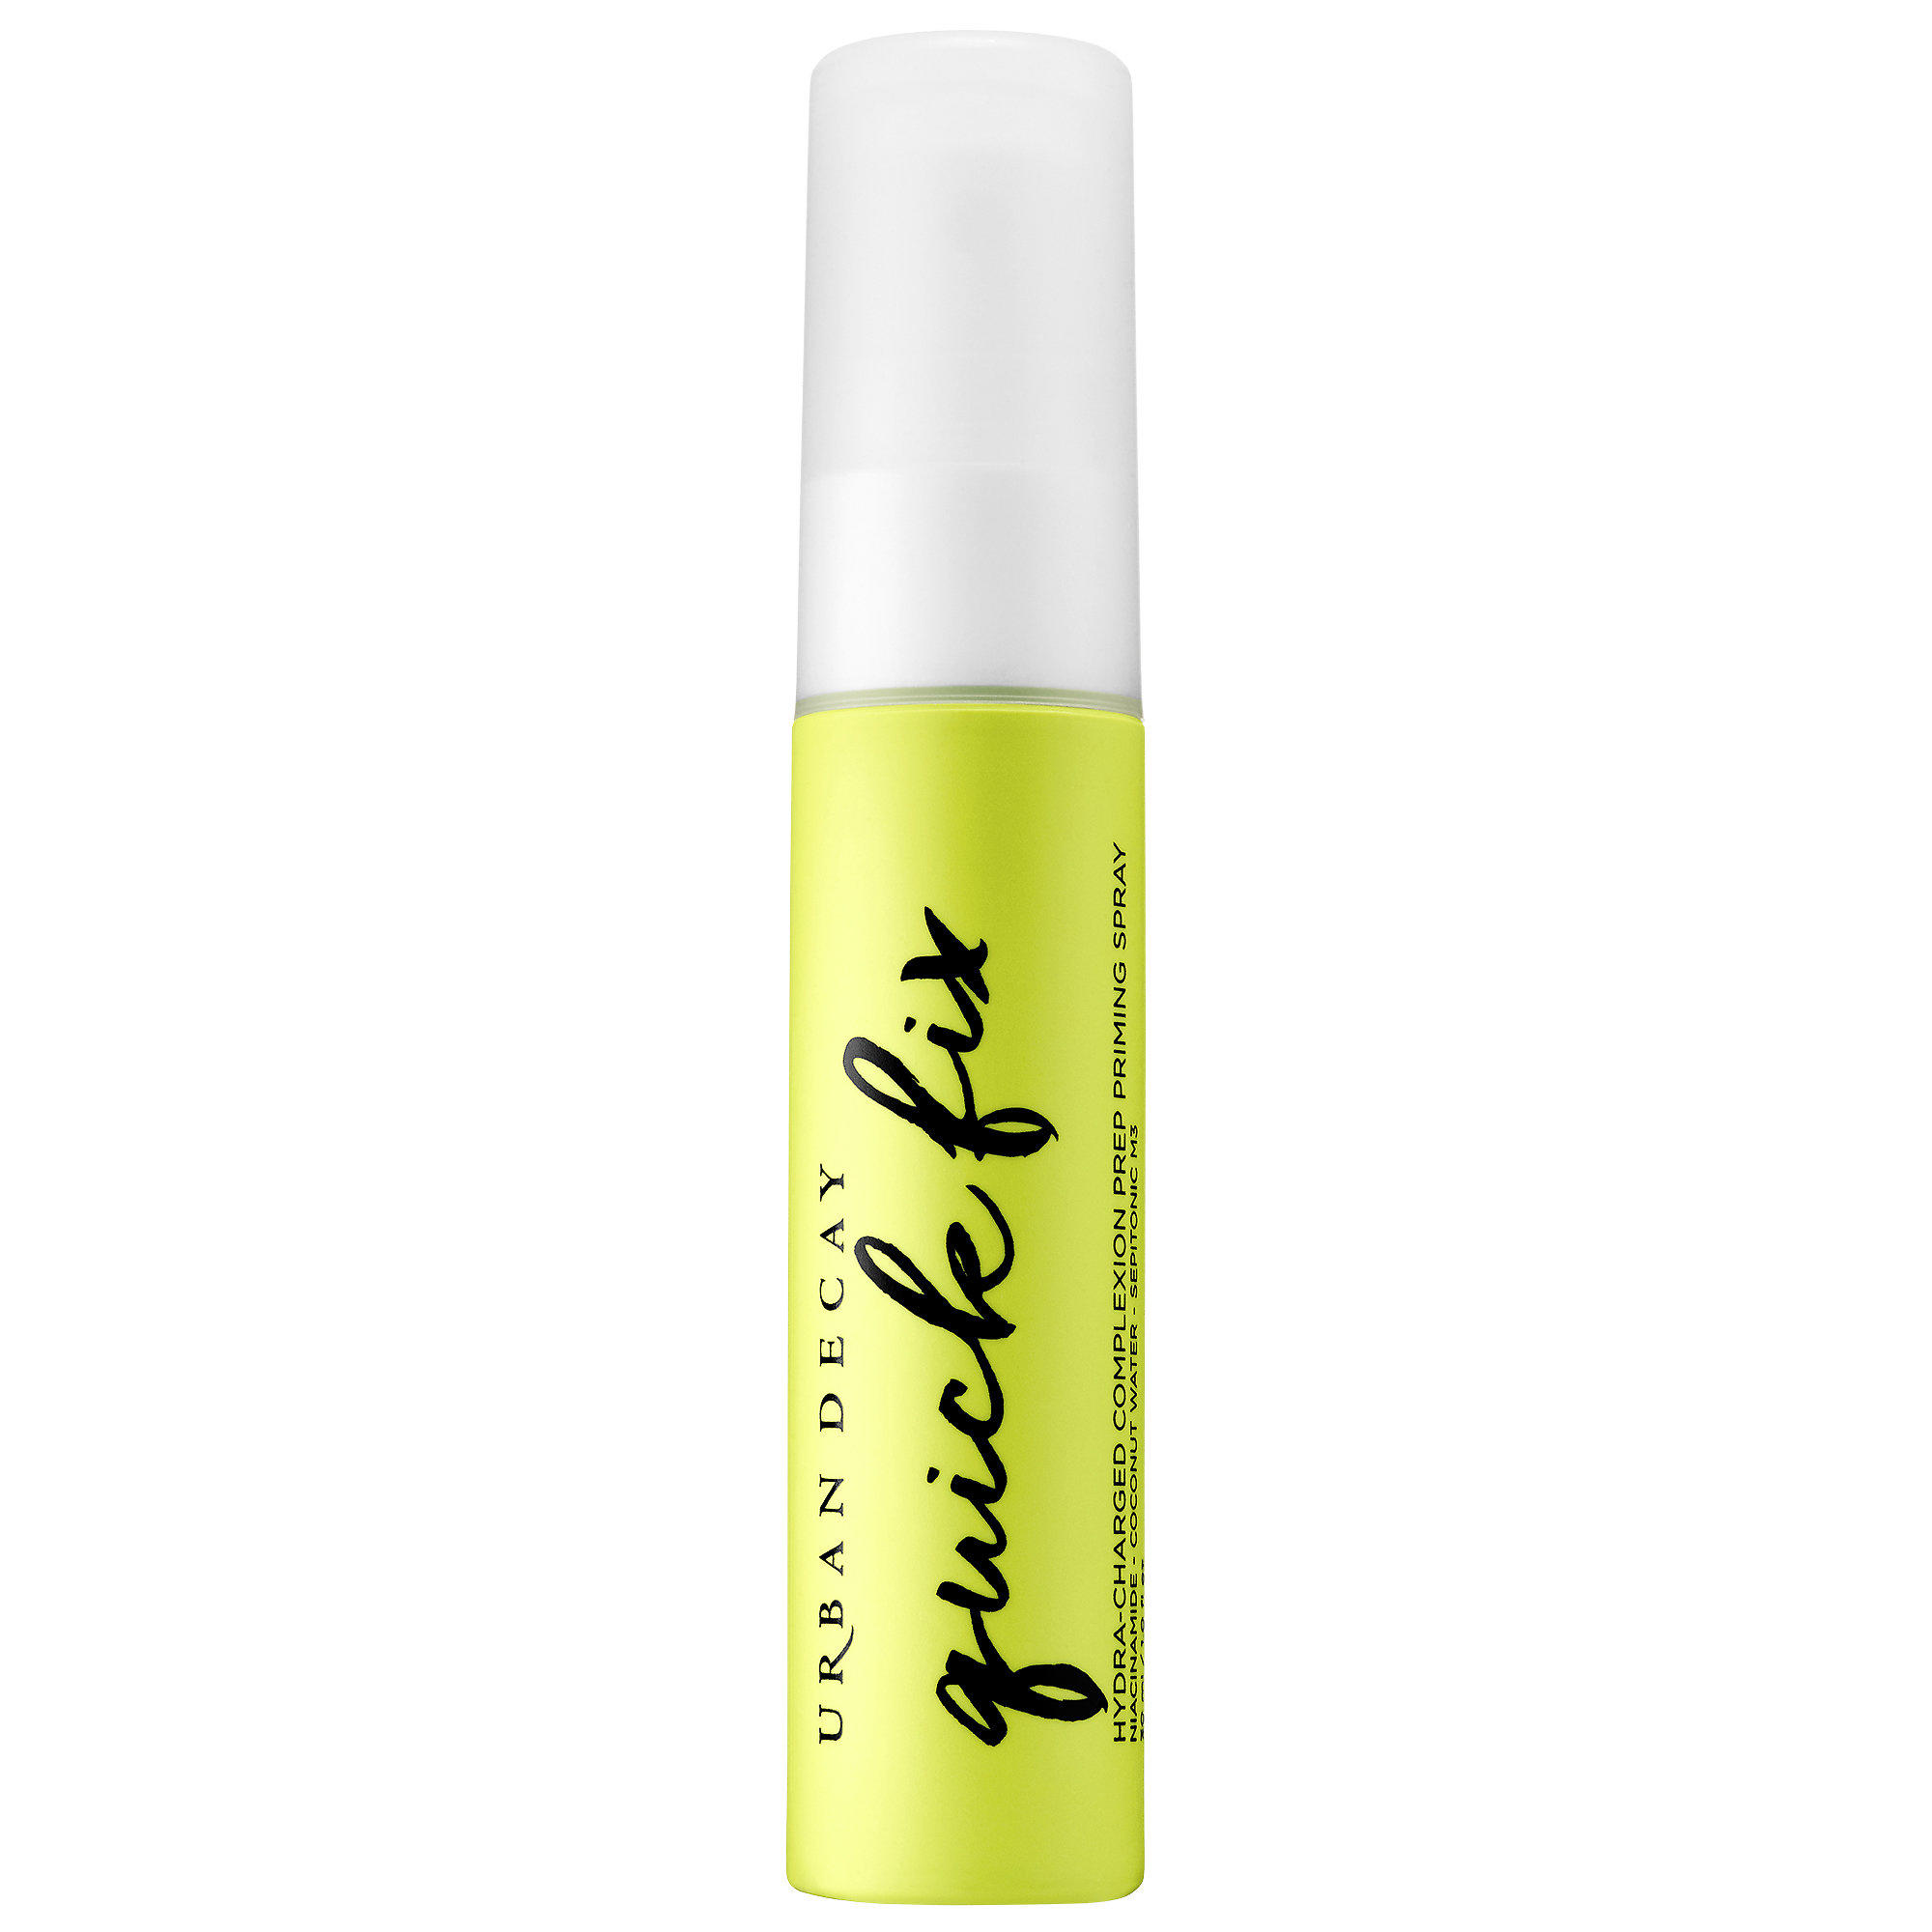 Urban Decay Quick Fix Hydracharged Complexion Prep Priming Spray 30ml